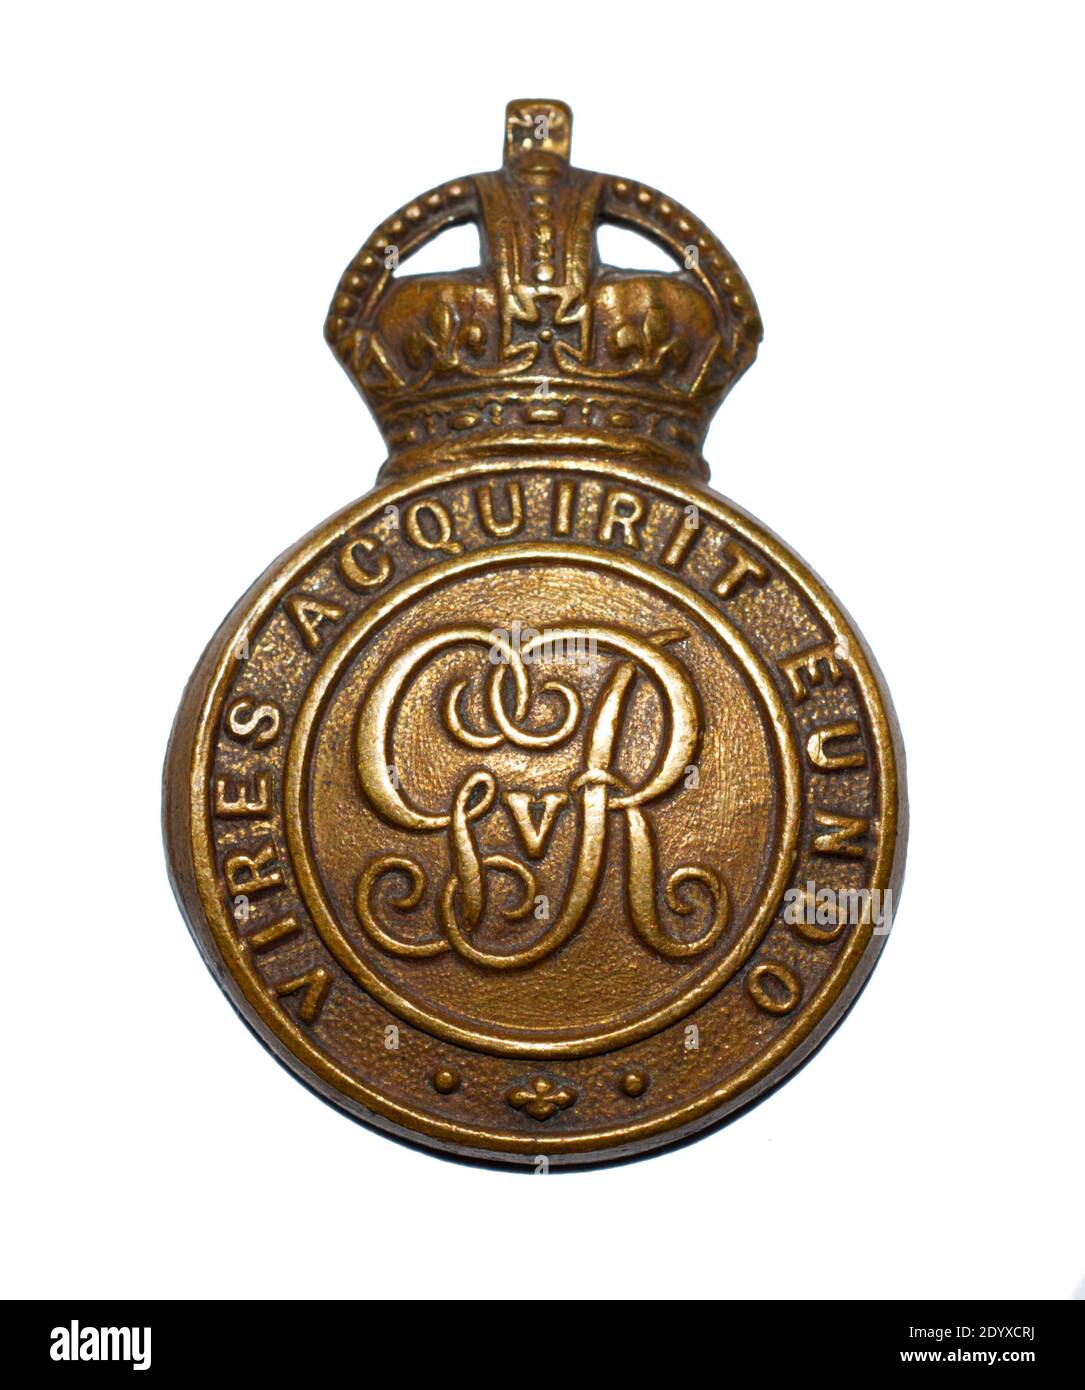 A cap badge of the Royal Military College c. 1910-1936. Stock Photo